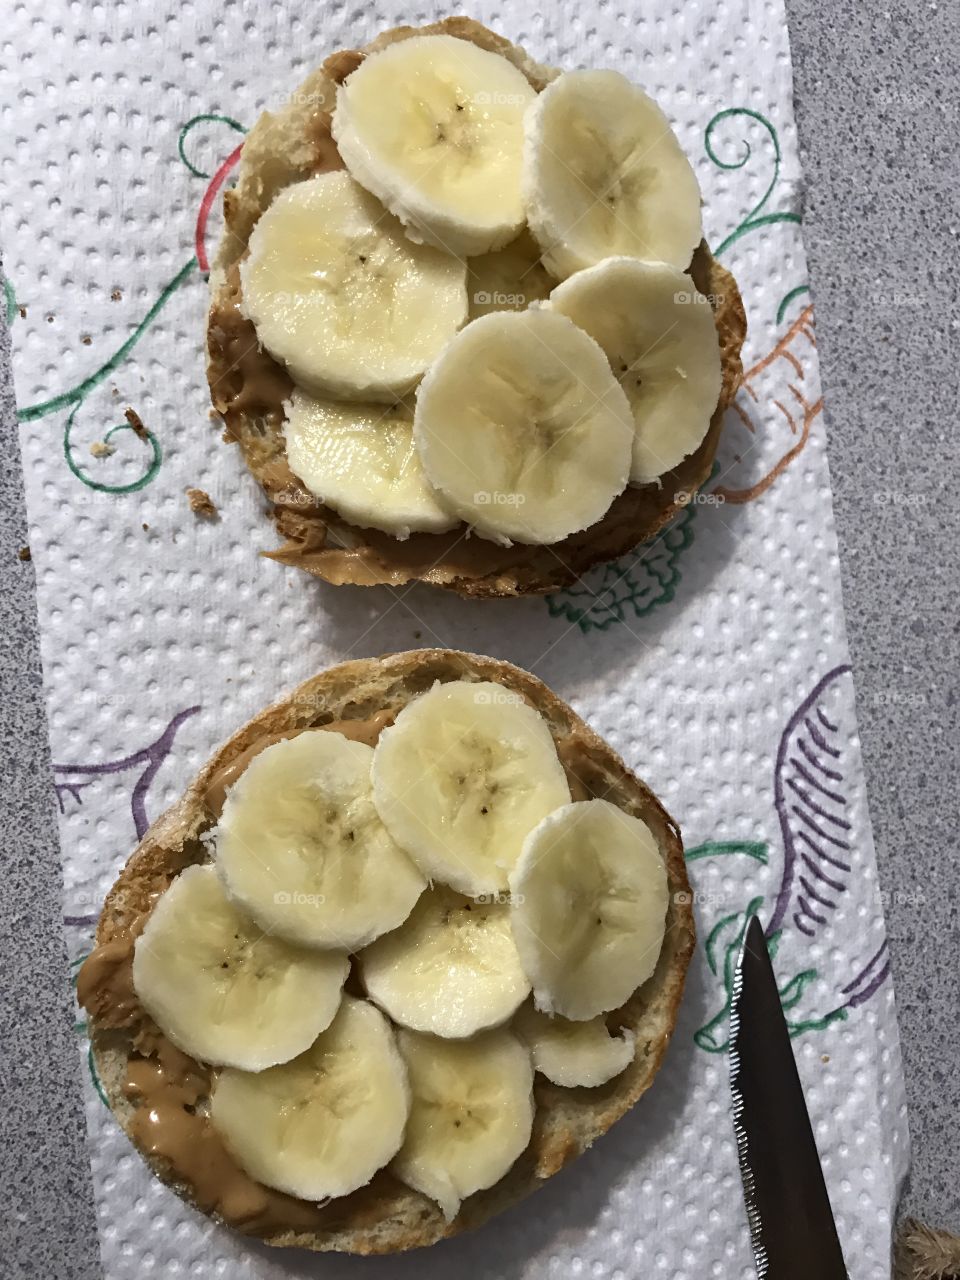 The perfect balance of carbs, protein and potassium/fruit to start the morning with rigor. 